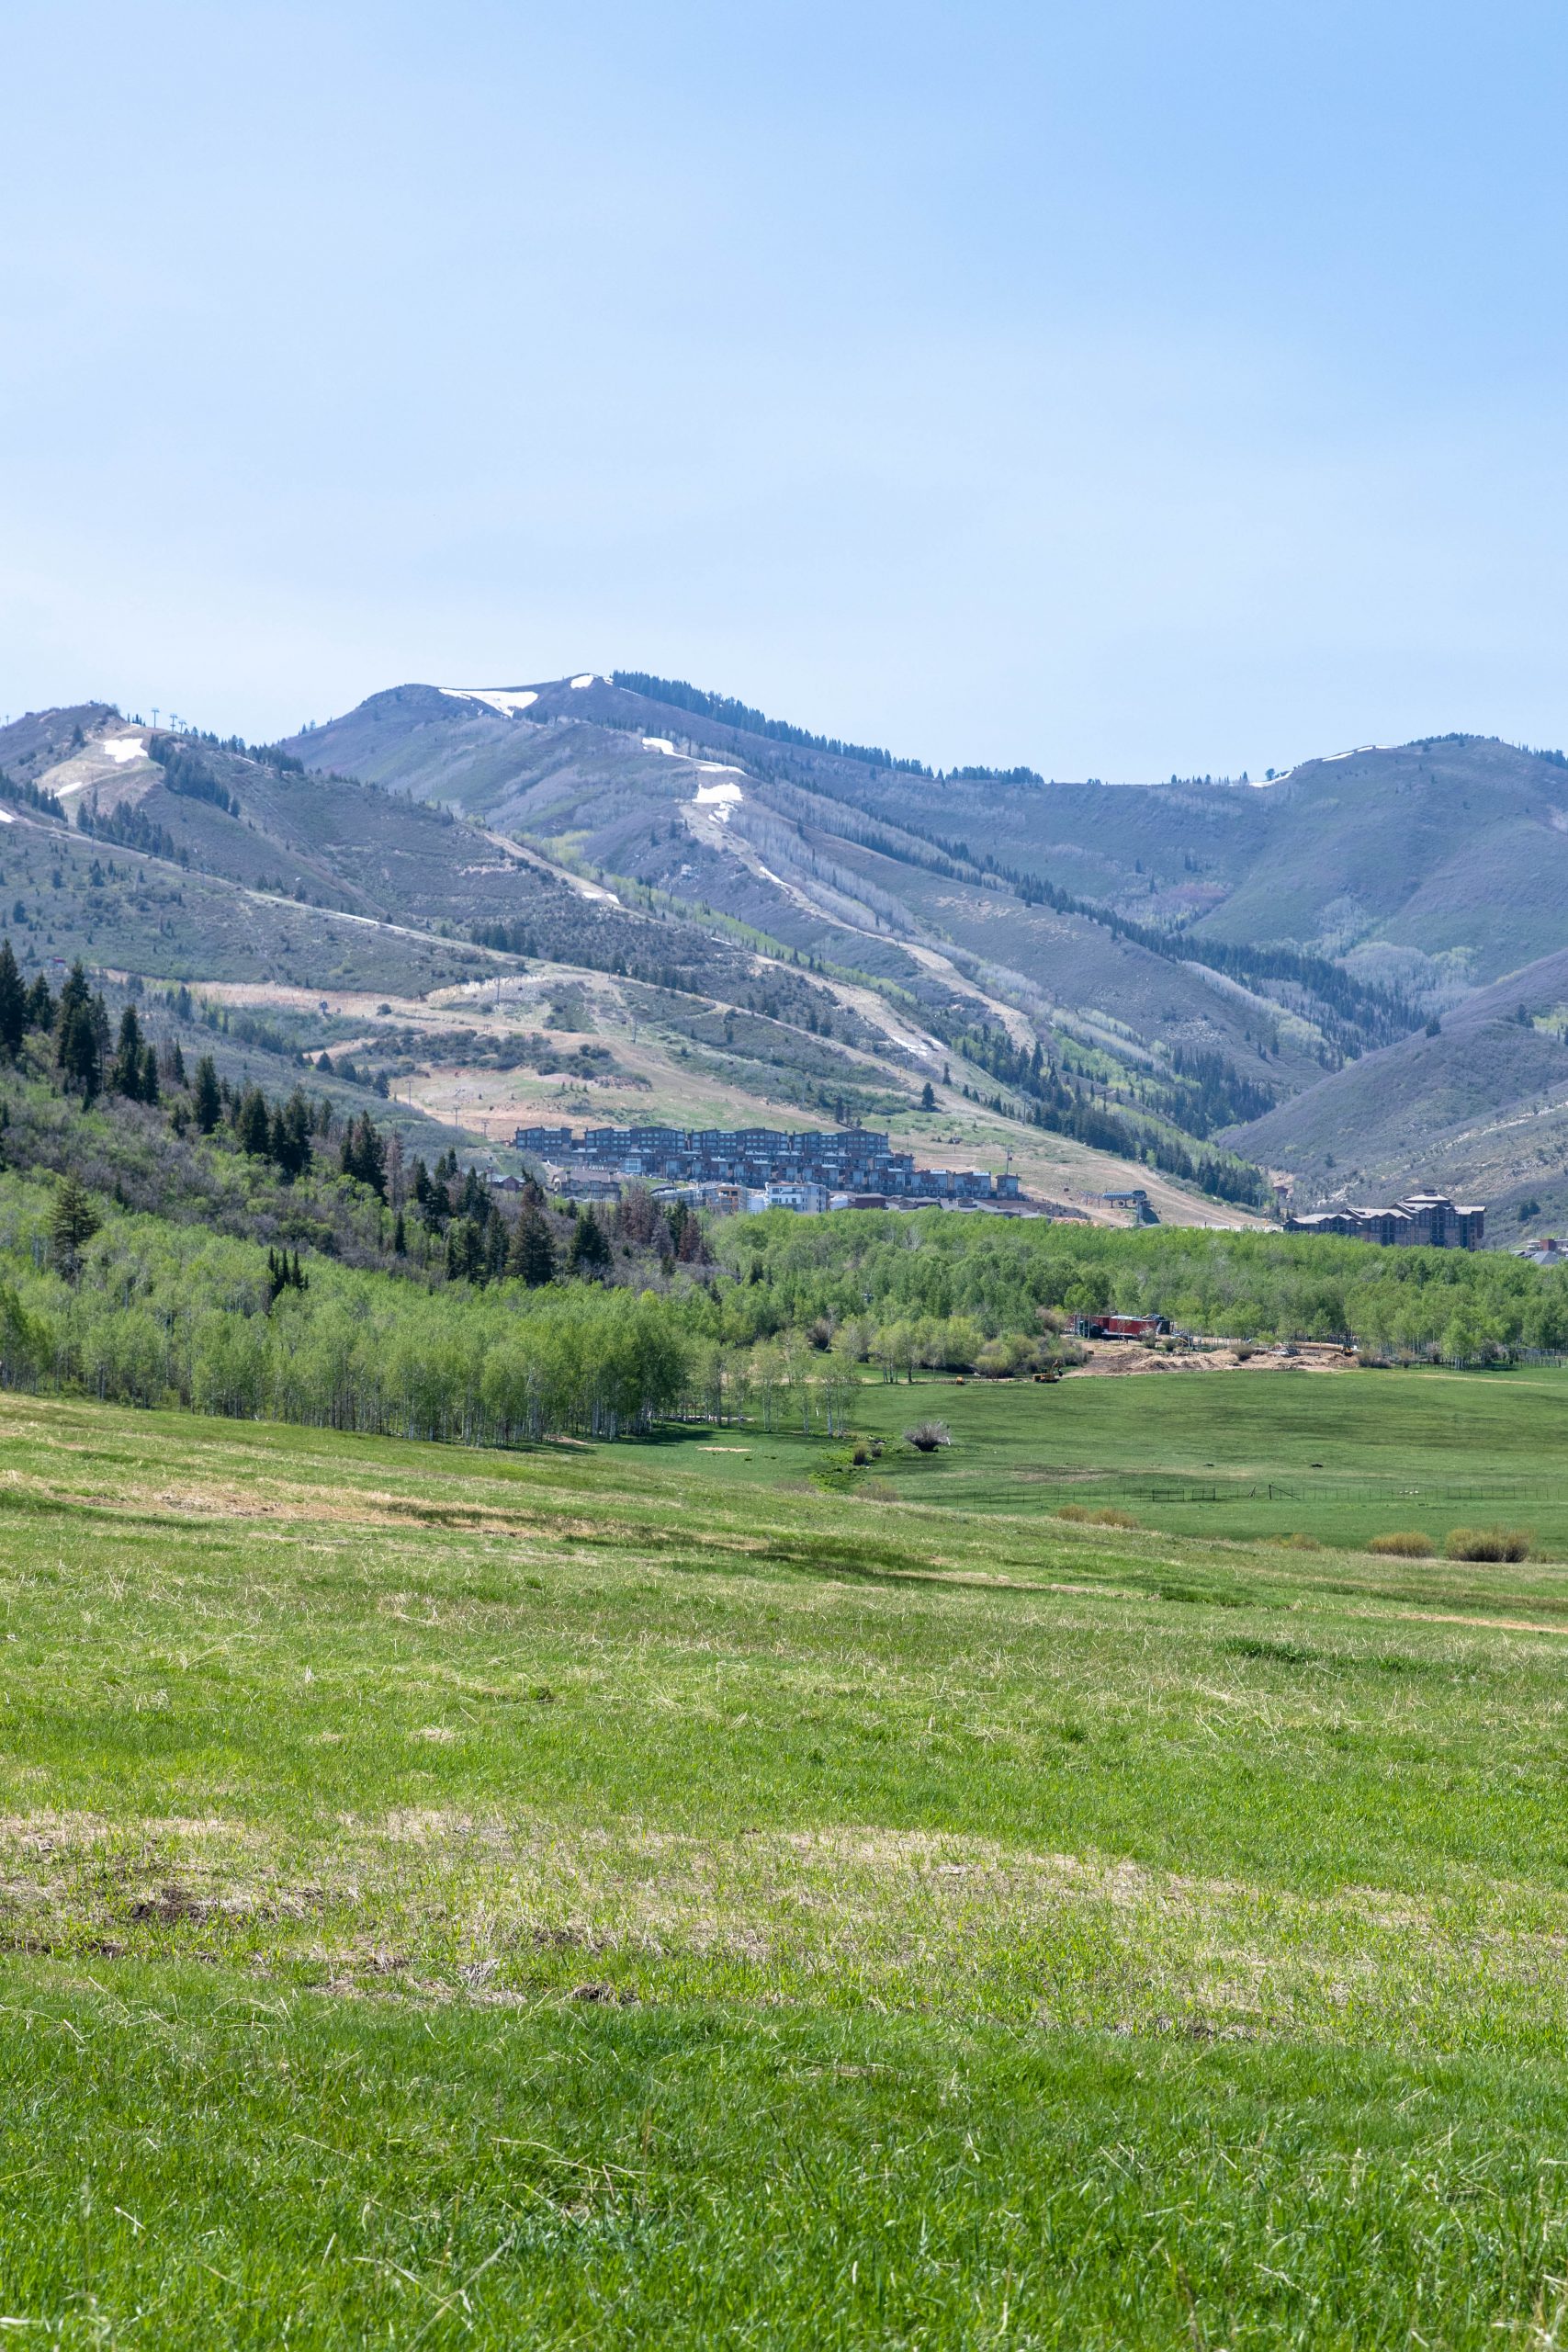 Park City is home to some fantastic mountain views!